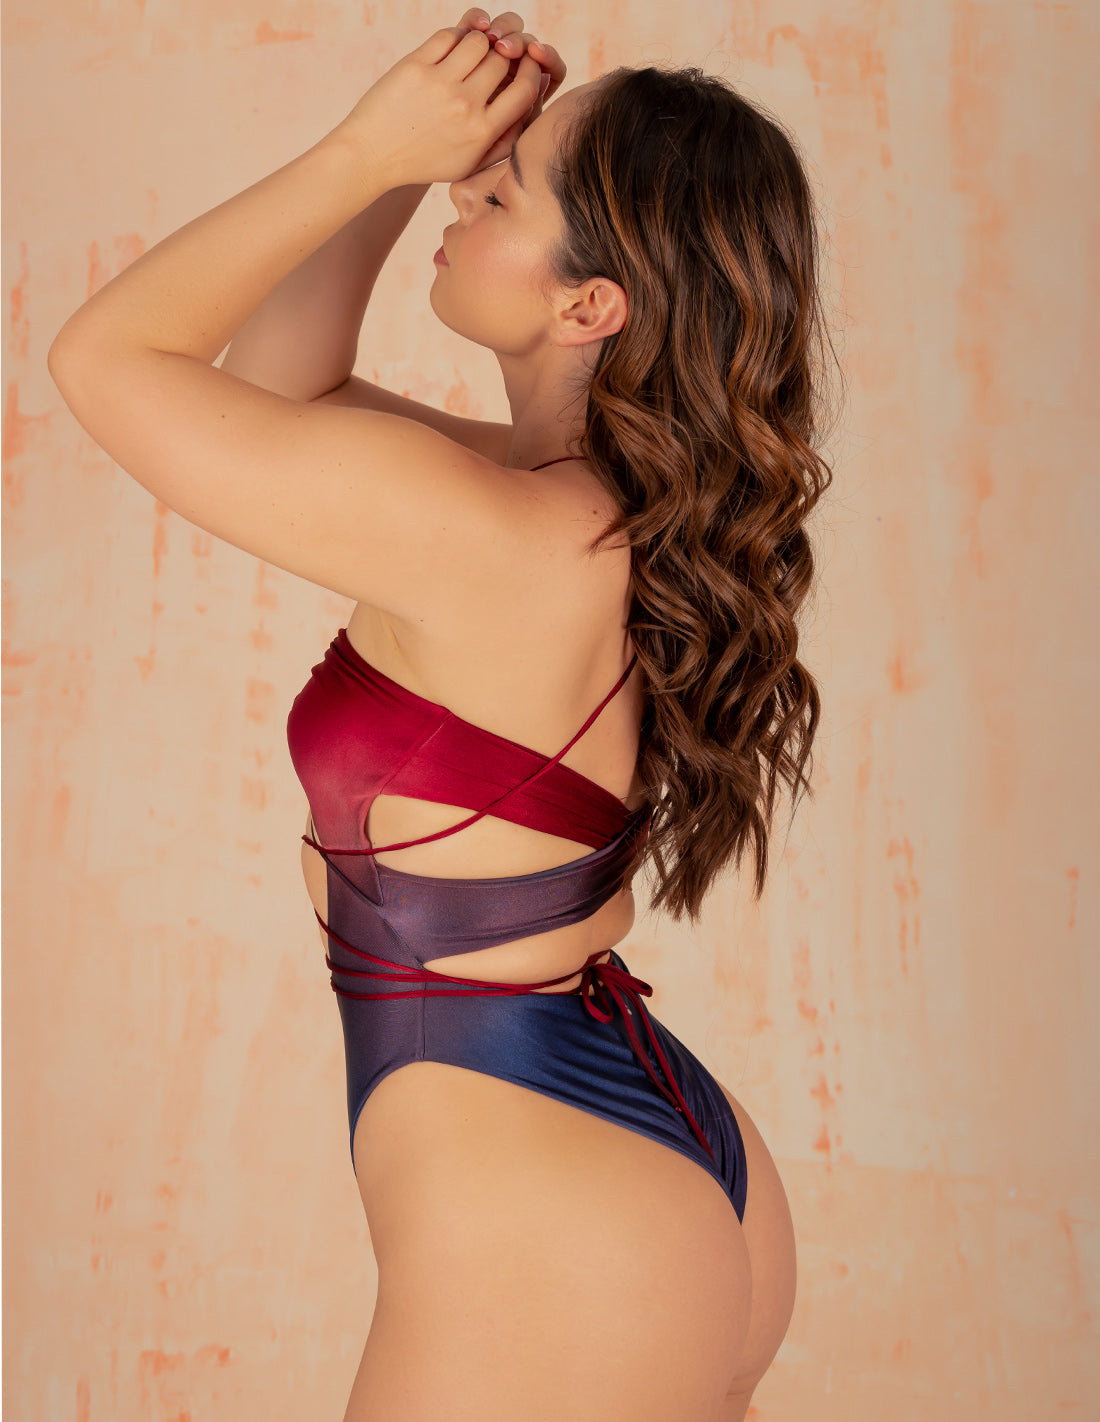 Heart One-Piece Metal Red + Metal Blue. Hand-Dyed One-Piece Swimsuit In Metal Red+Metal Blue. Entreaguas